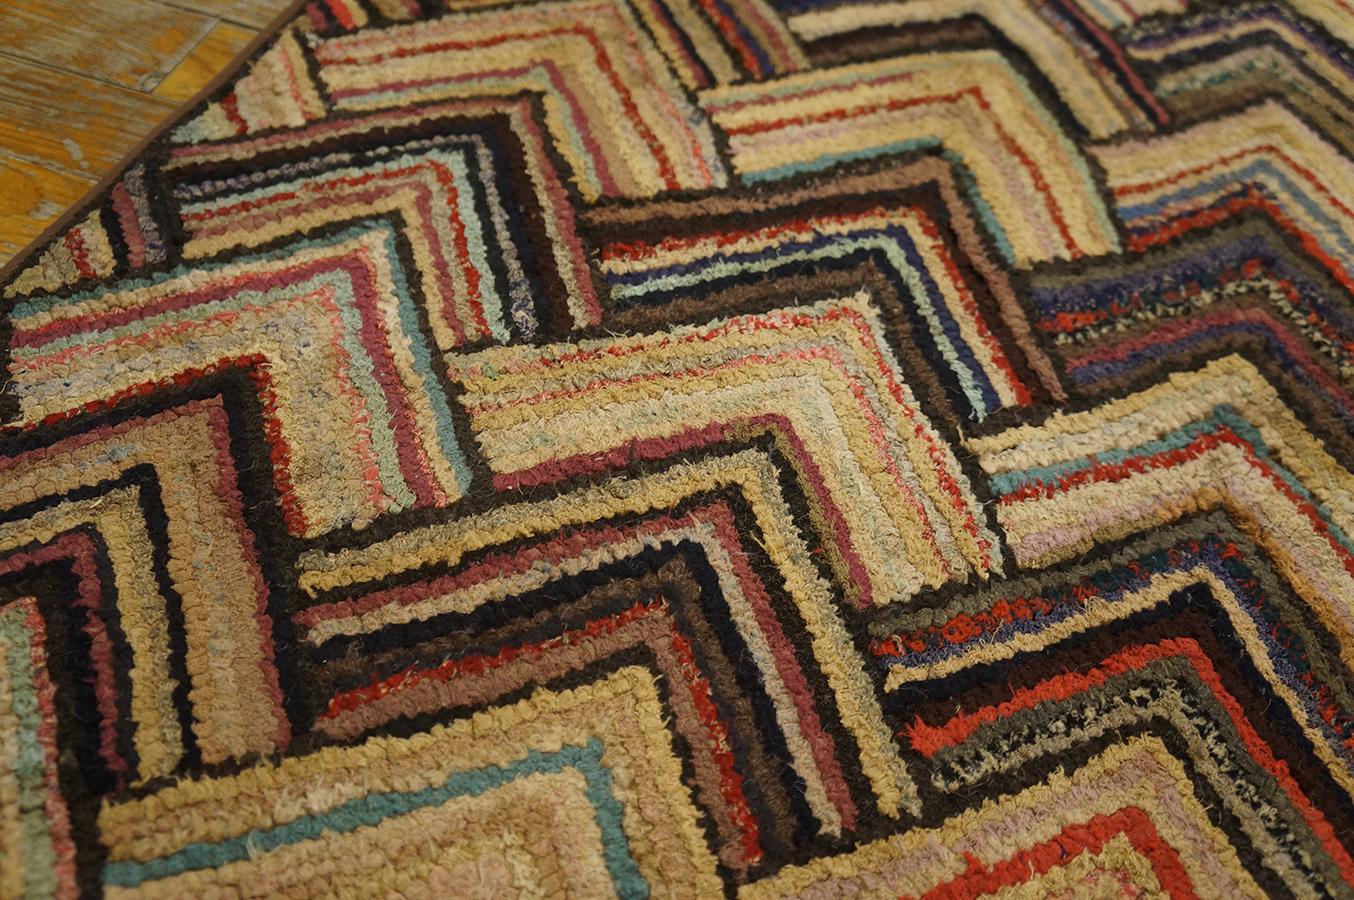 Early 20th Century American Hooked Rug ( 2' 7'' x 4' 6'' - 78 x 137 cm ) For Sale 5